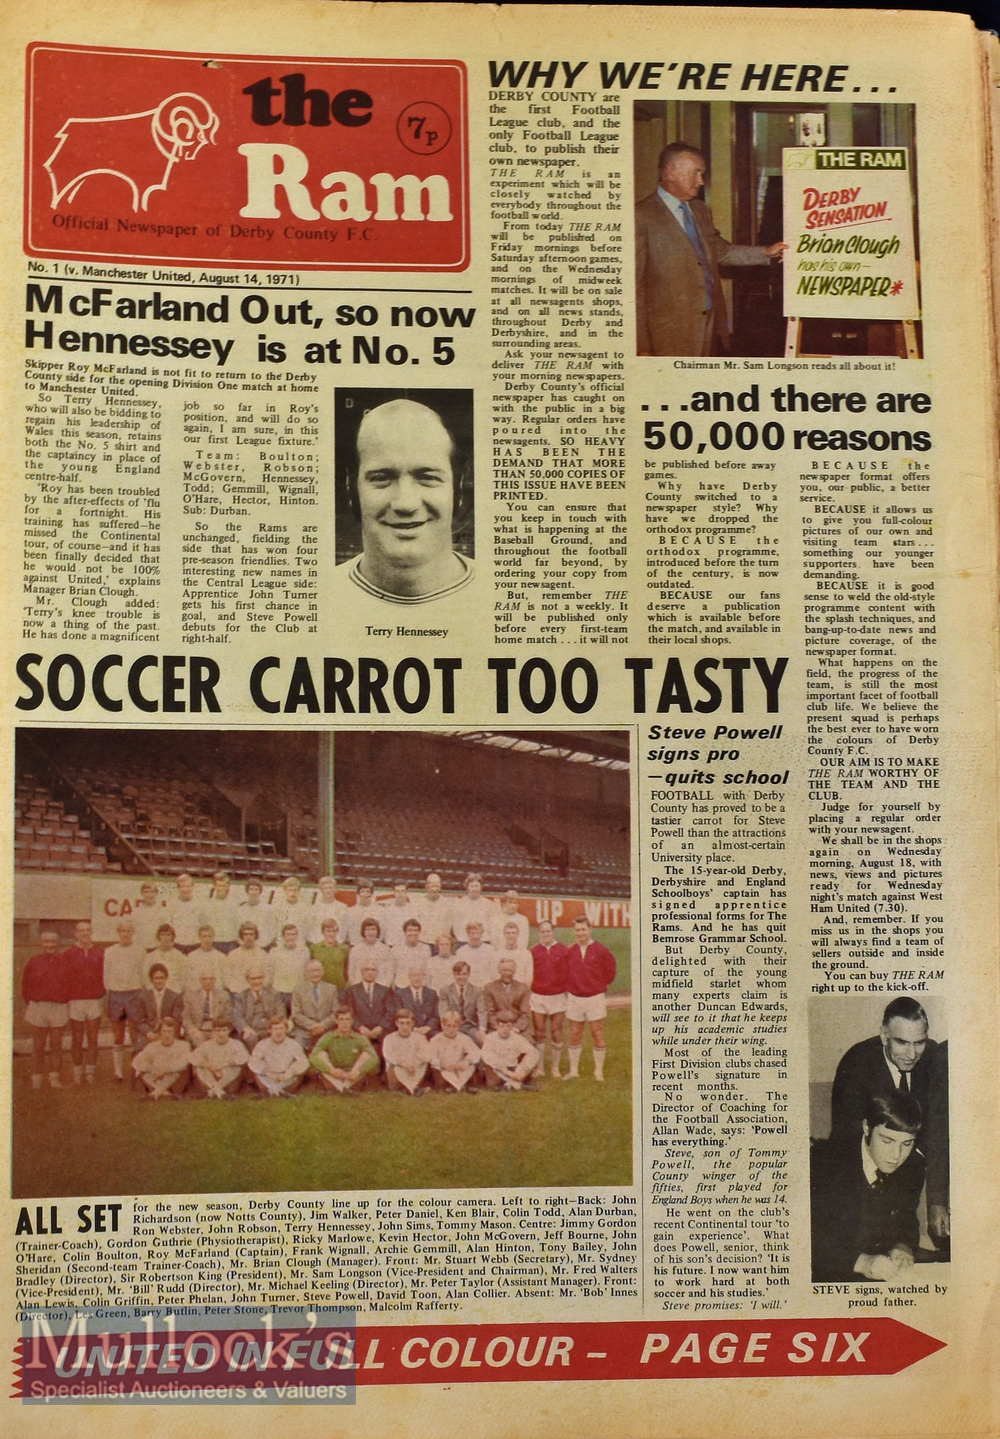 Bound 1971/72 ‘Championship Season’ Derby County football Newspaper/Programmes bound within large